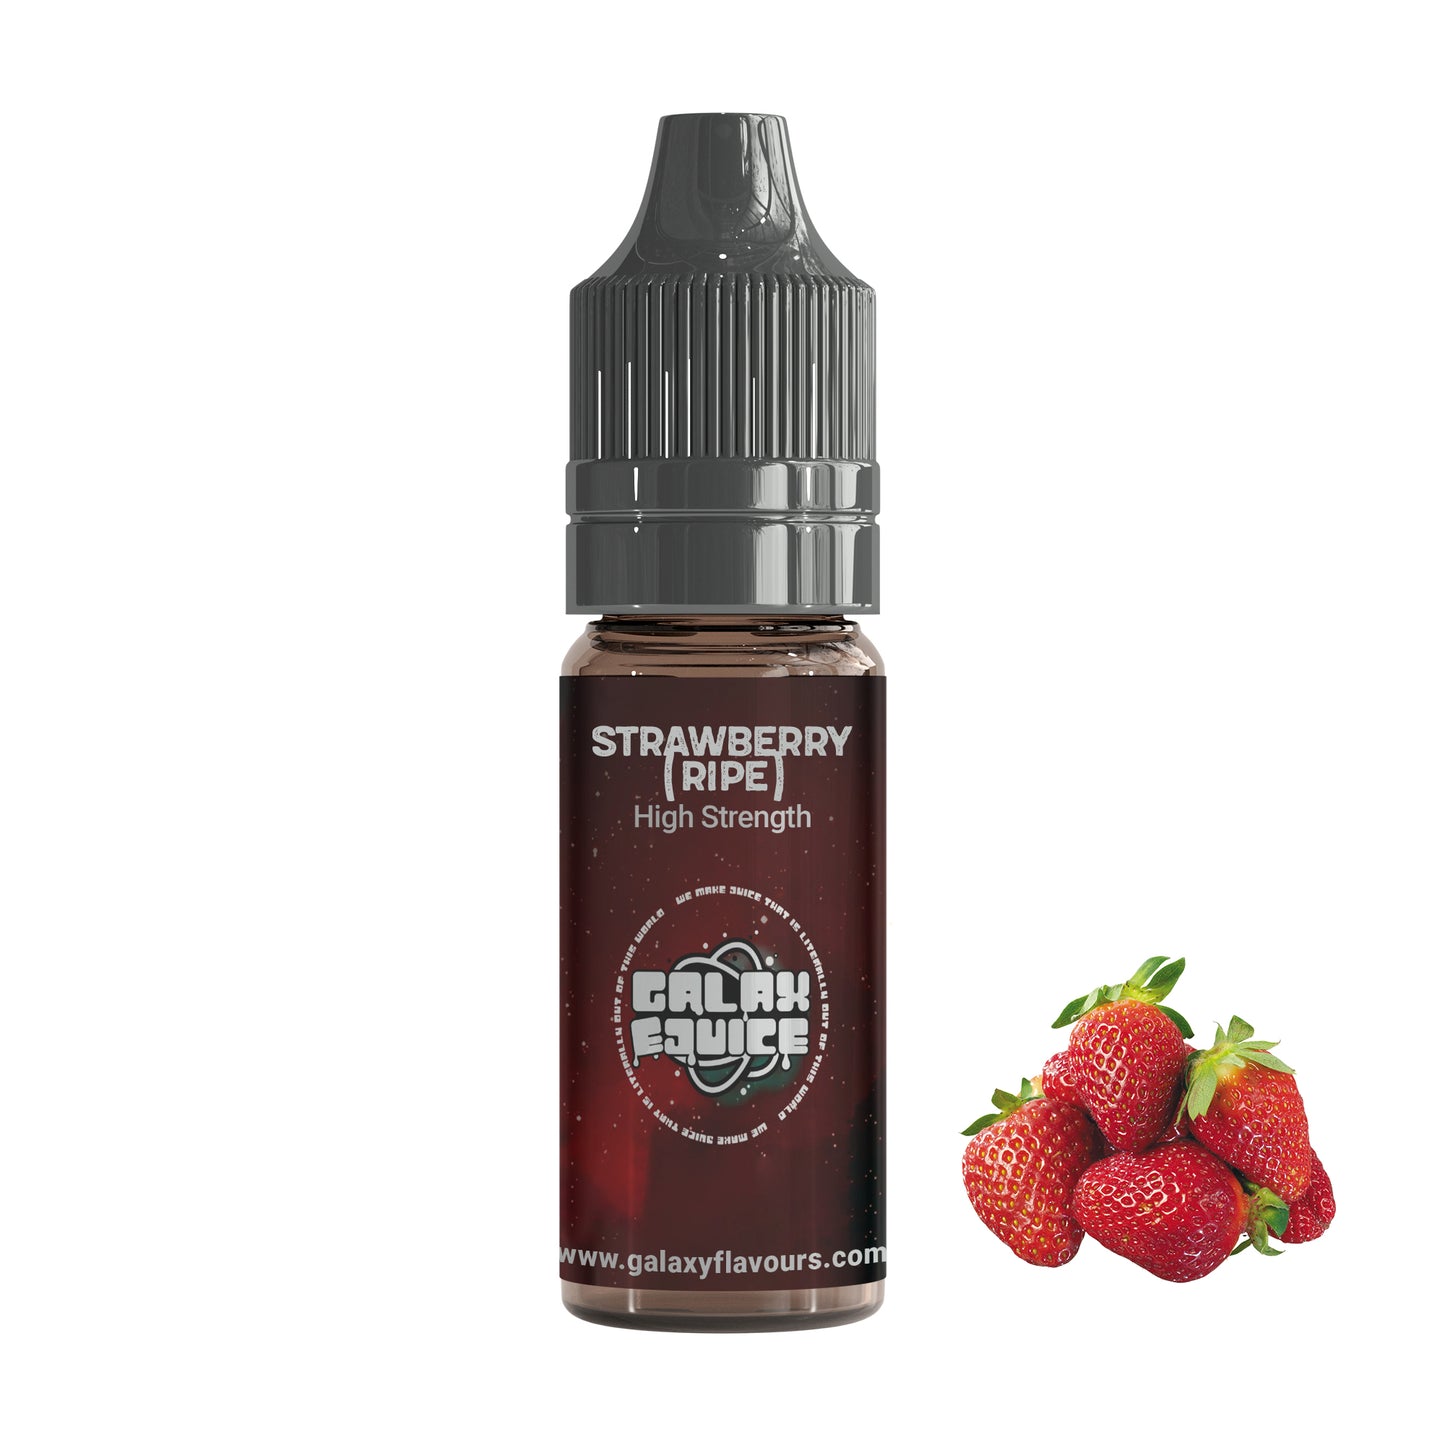 Ripe Strawberry High Strength Professional Flavouring.